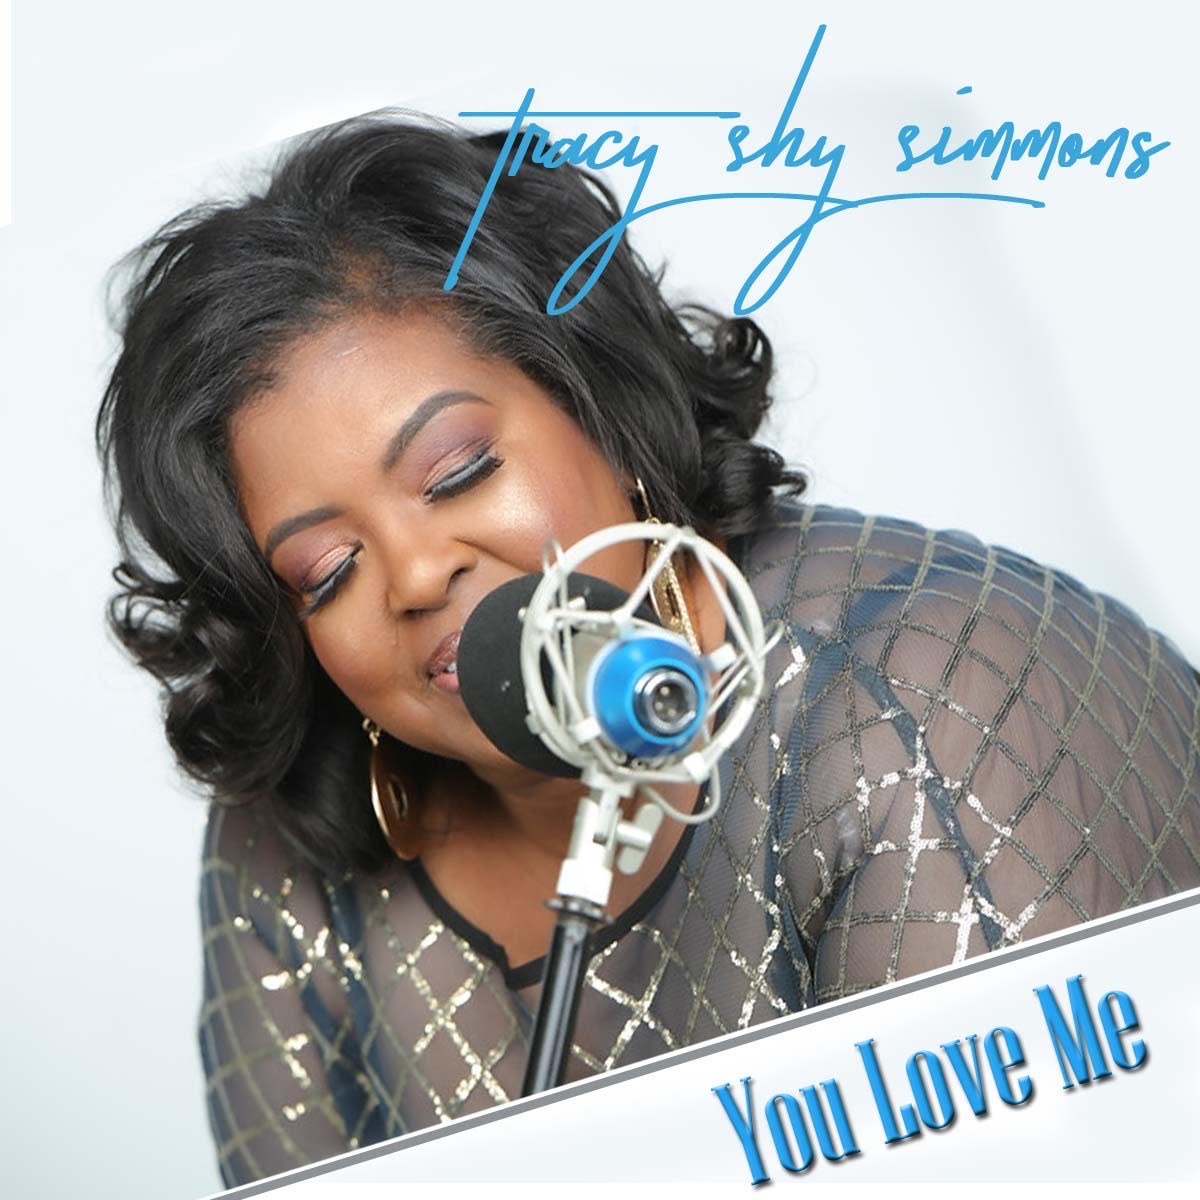 Art for DWGN Radio Drop With Tracy Simmons by DWGN Radio Drop With Tracy Simmons